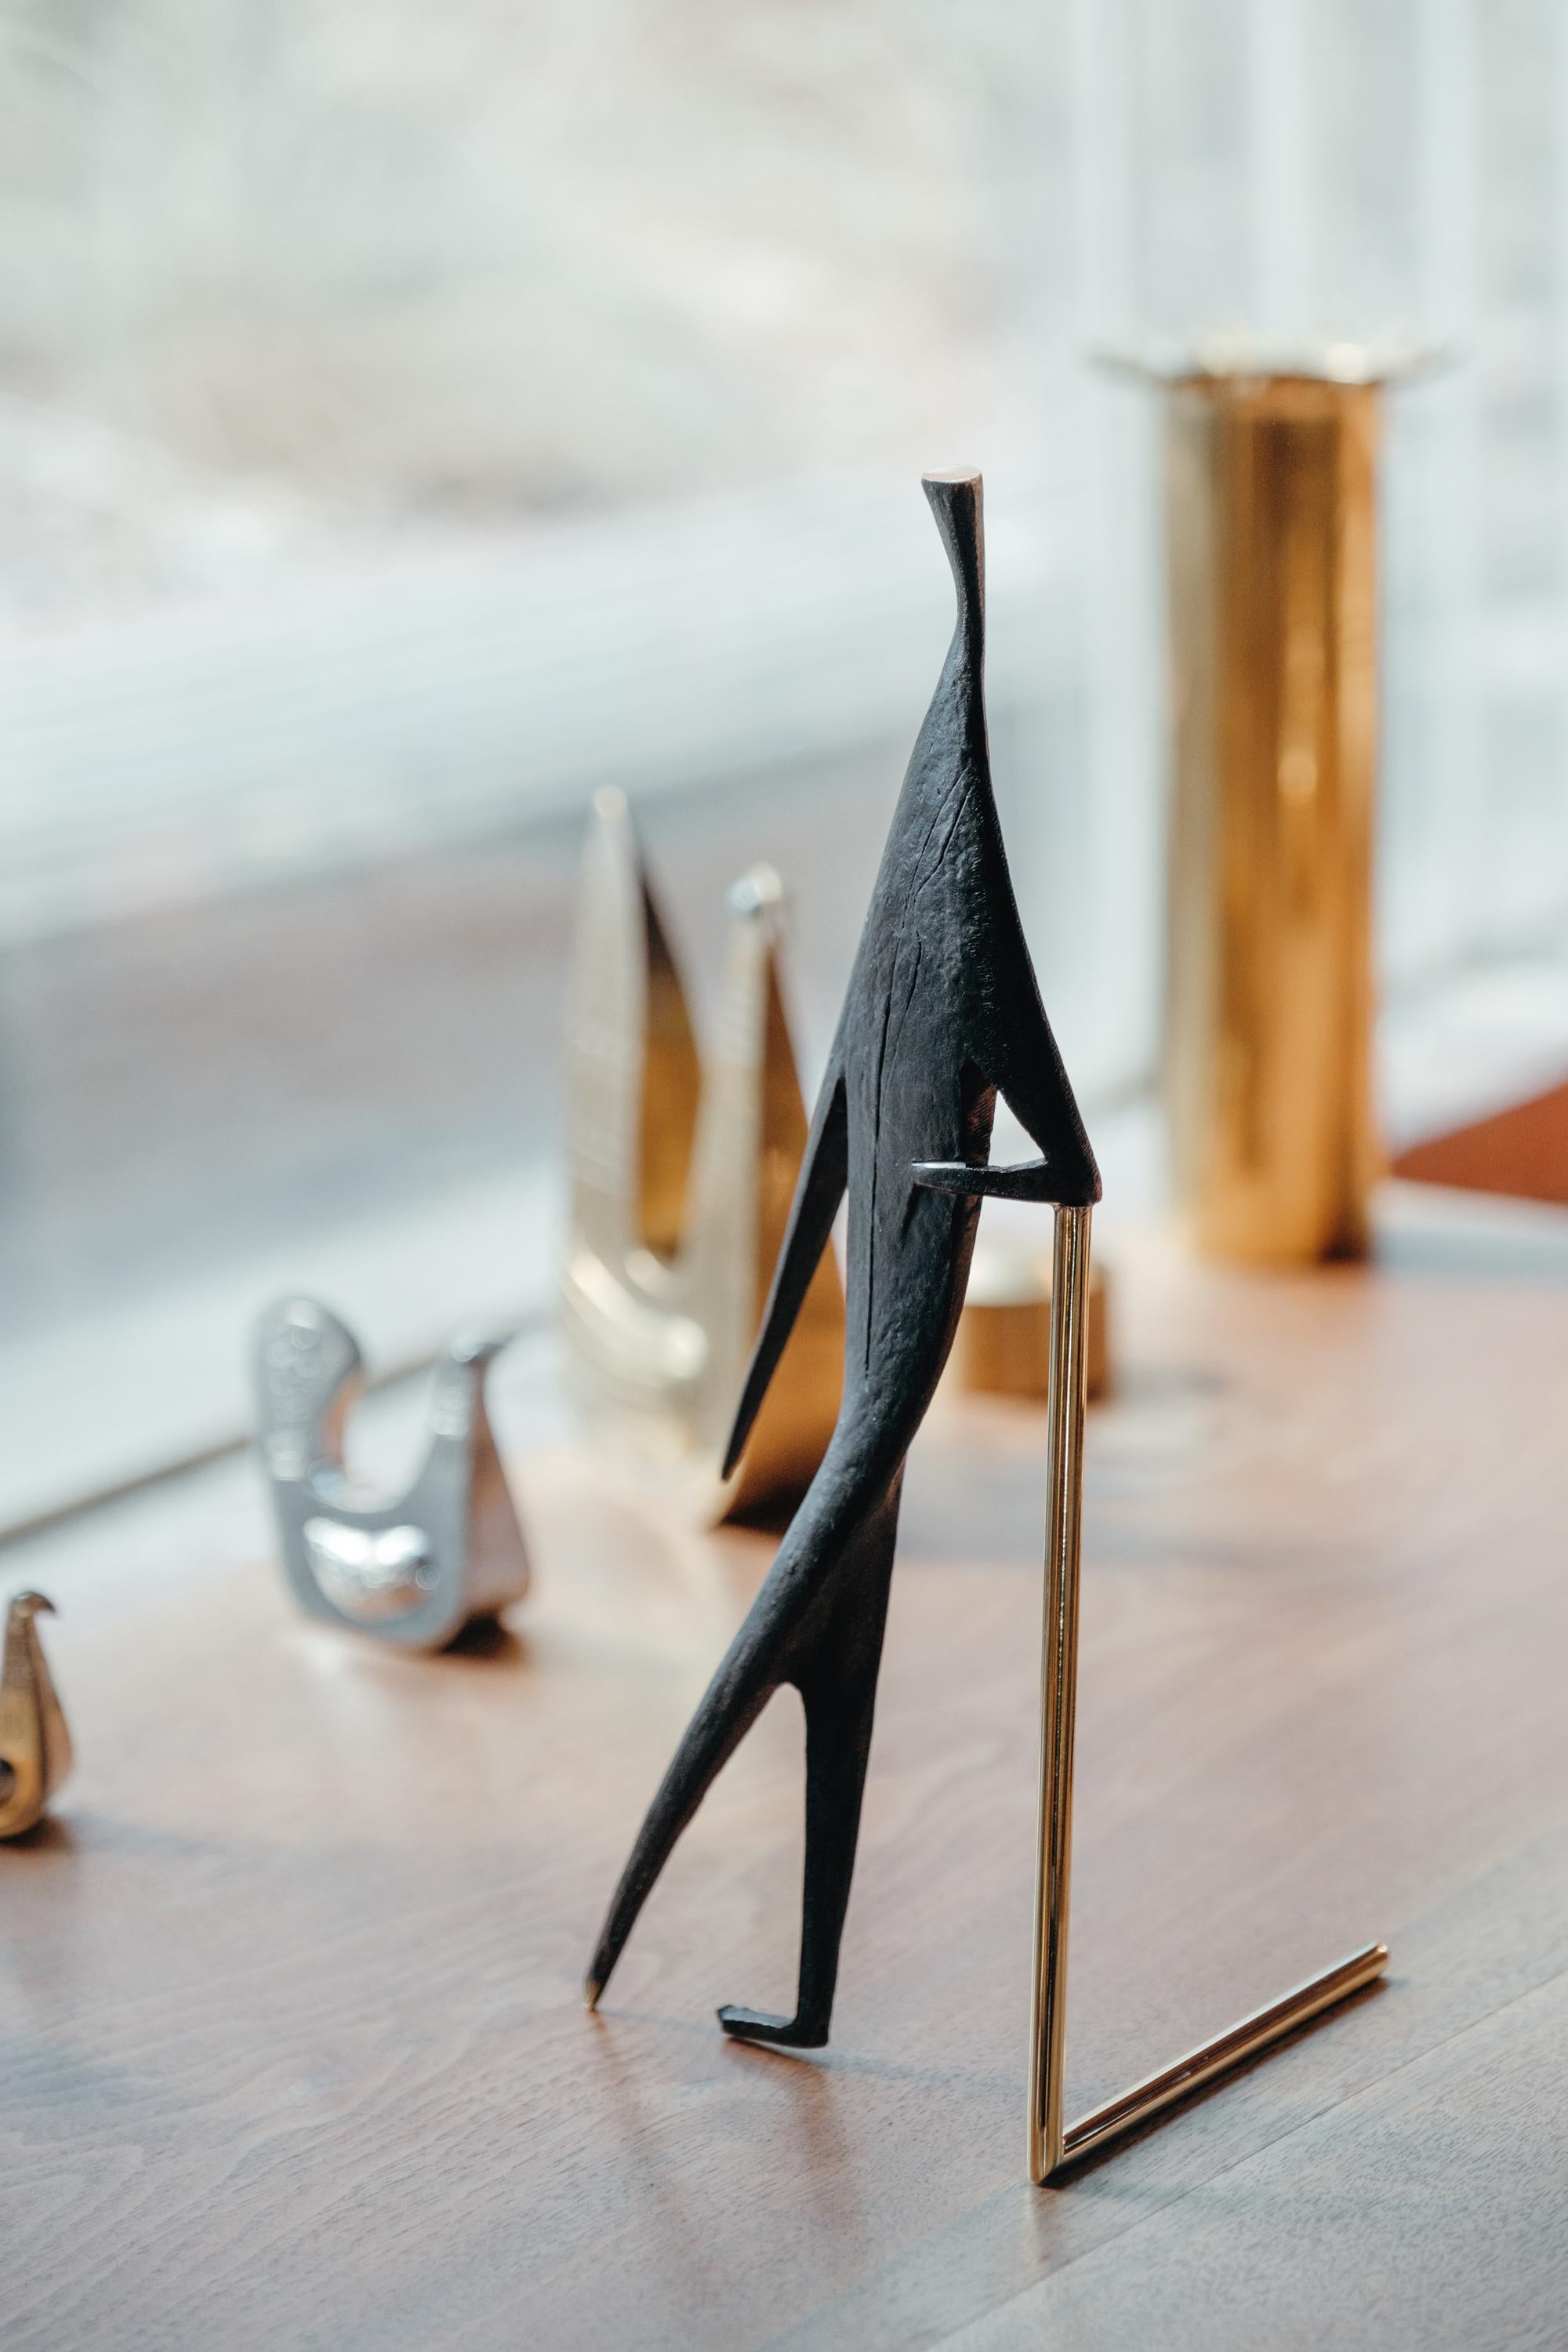 Carl Aubo¨ck Model #4060 'Man With Stick' brass sculpture. Designed in the 1950s, this incredibly refined and sculptural figure is executed in polished and patinated brass. 

Price is per item. Available in unlimited quantities.

One in stock and